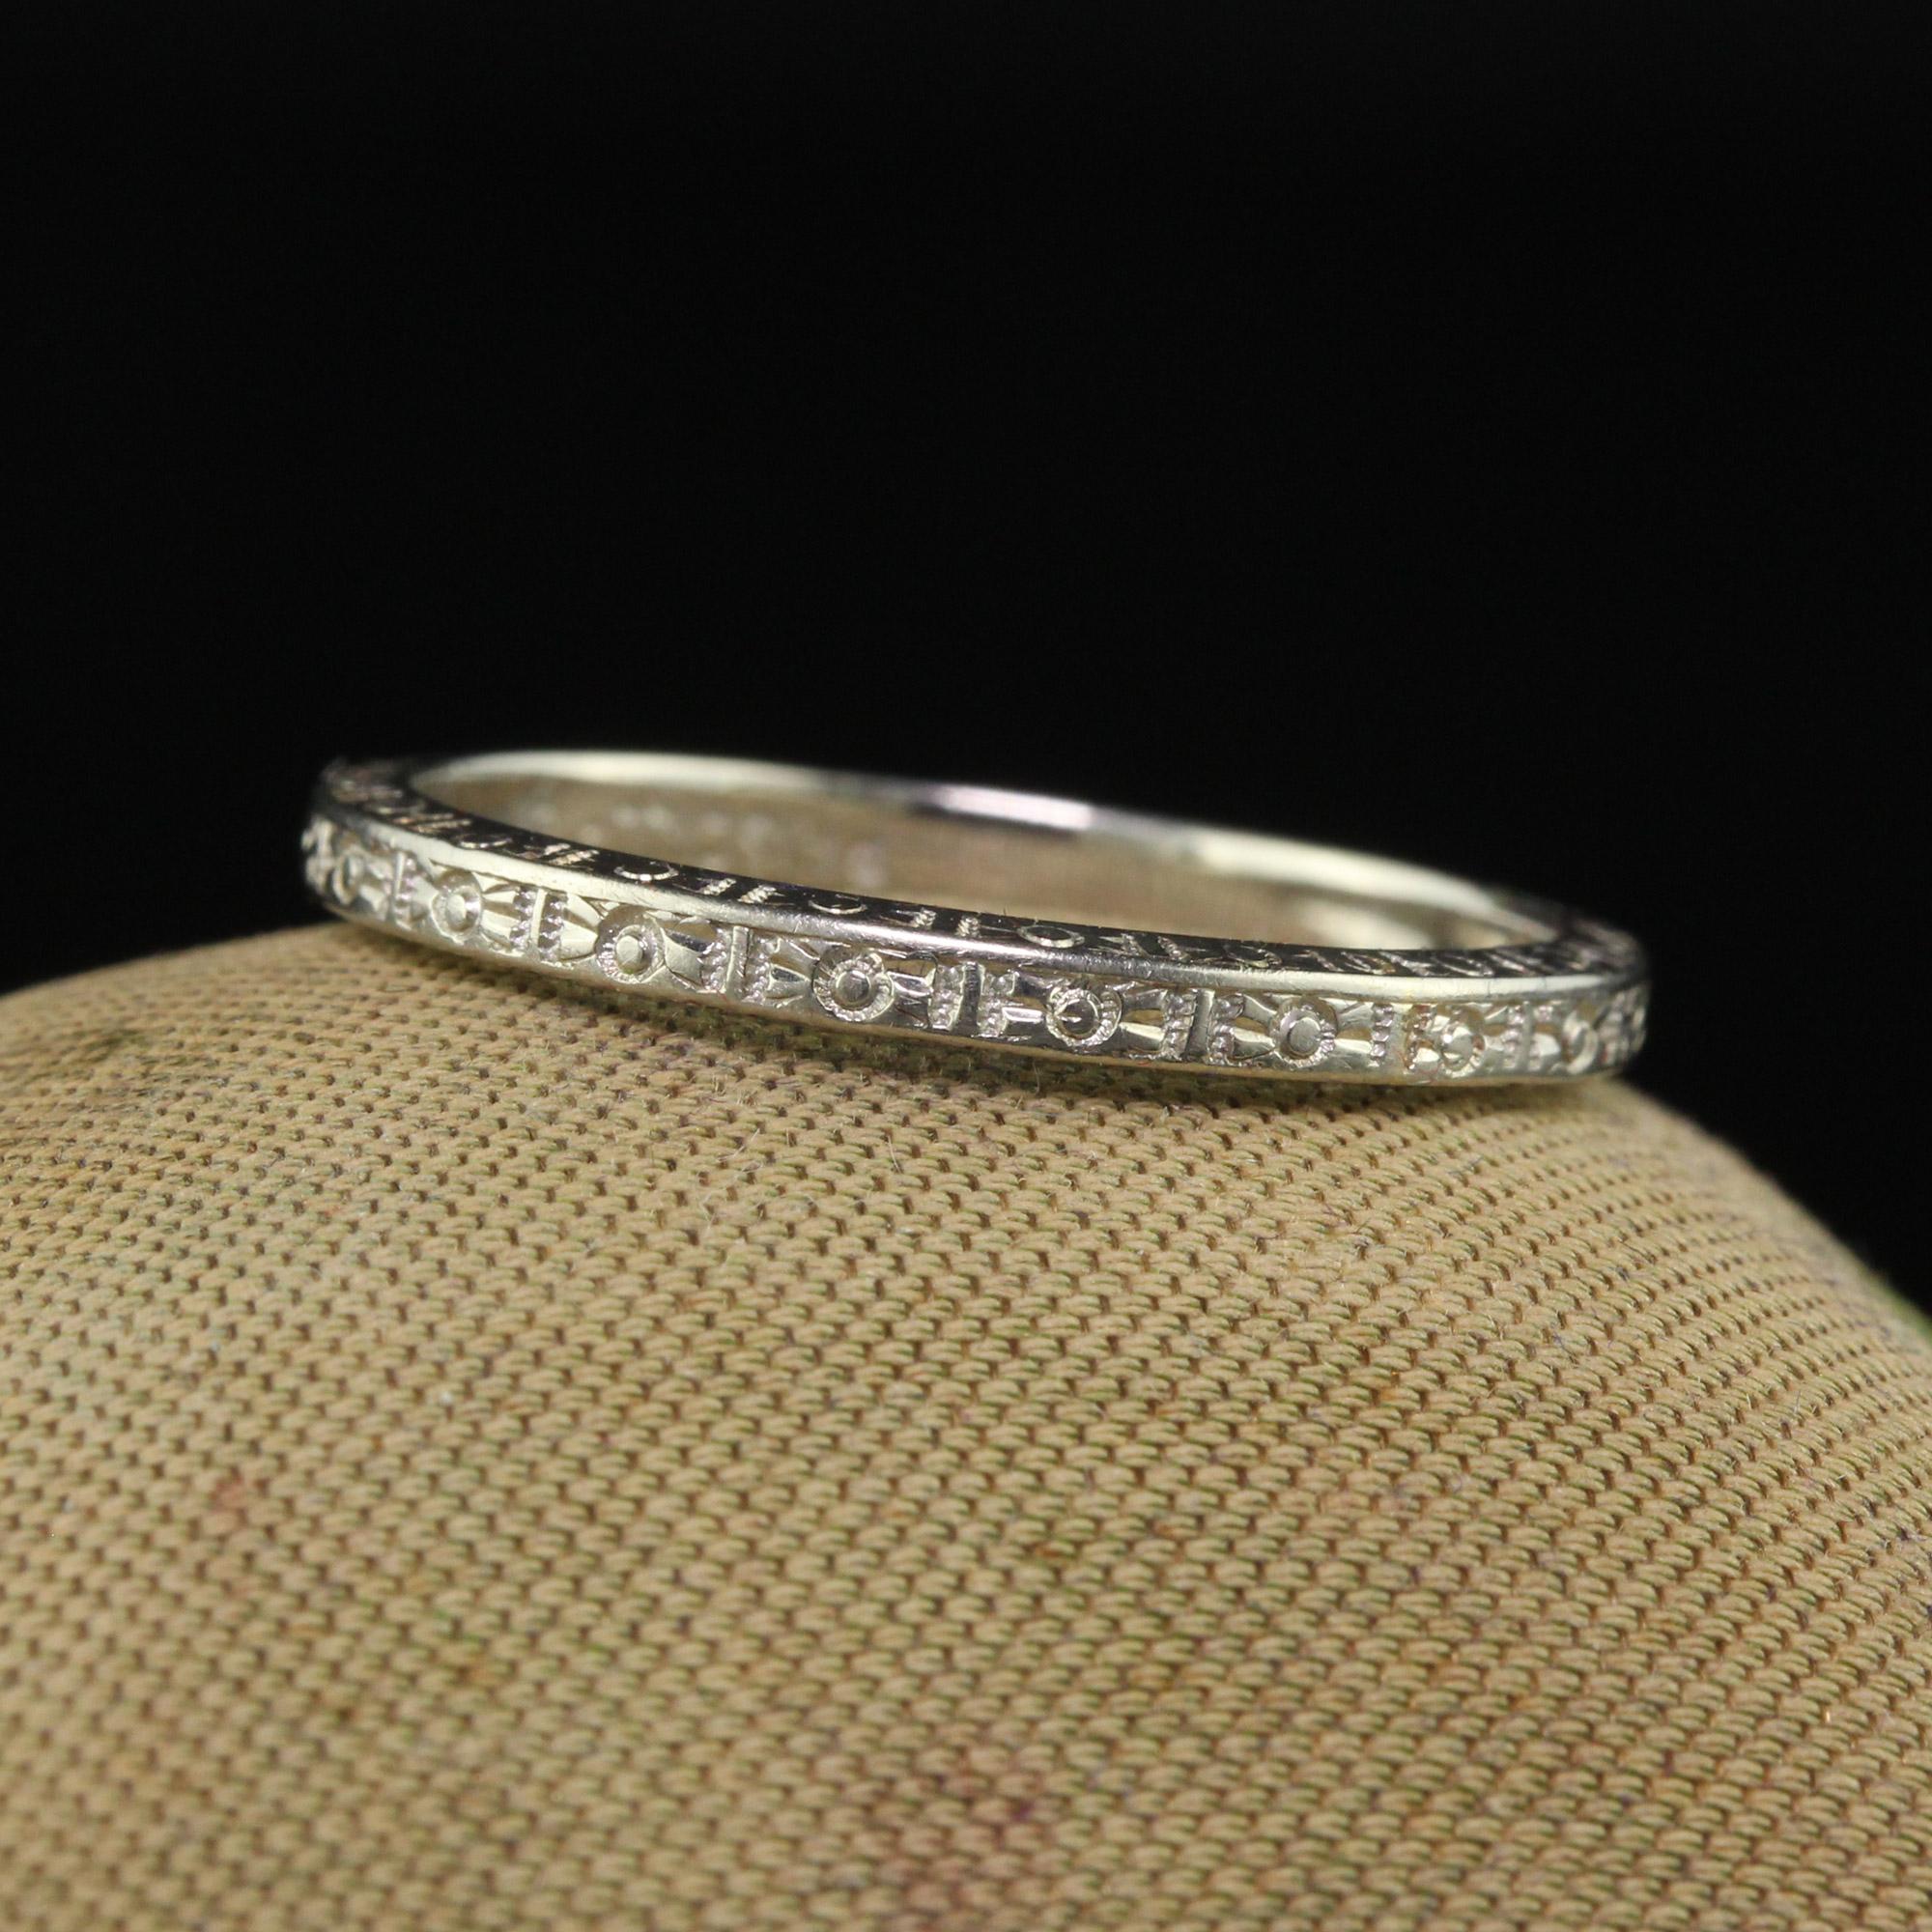 Beautiful Antique Art Deco 18K White Gold Priscilla Engraved Wedding Band - Size 6 3/4. This gorgeous wedding band is crafted in 18k white gold. The band is beautifully engraved around the entire ring and even the sides. The ring is in good